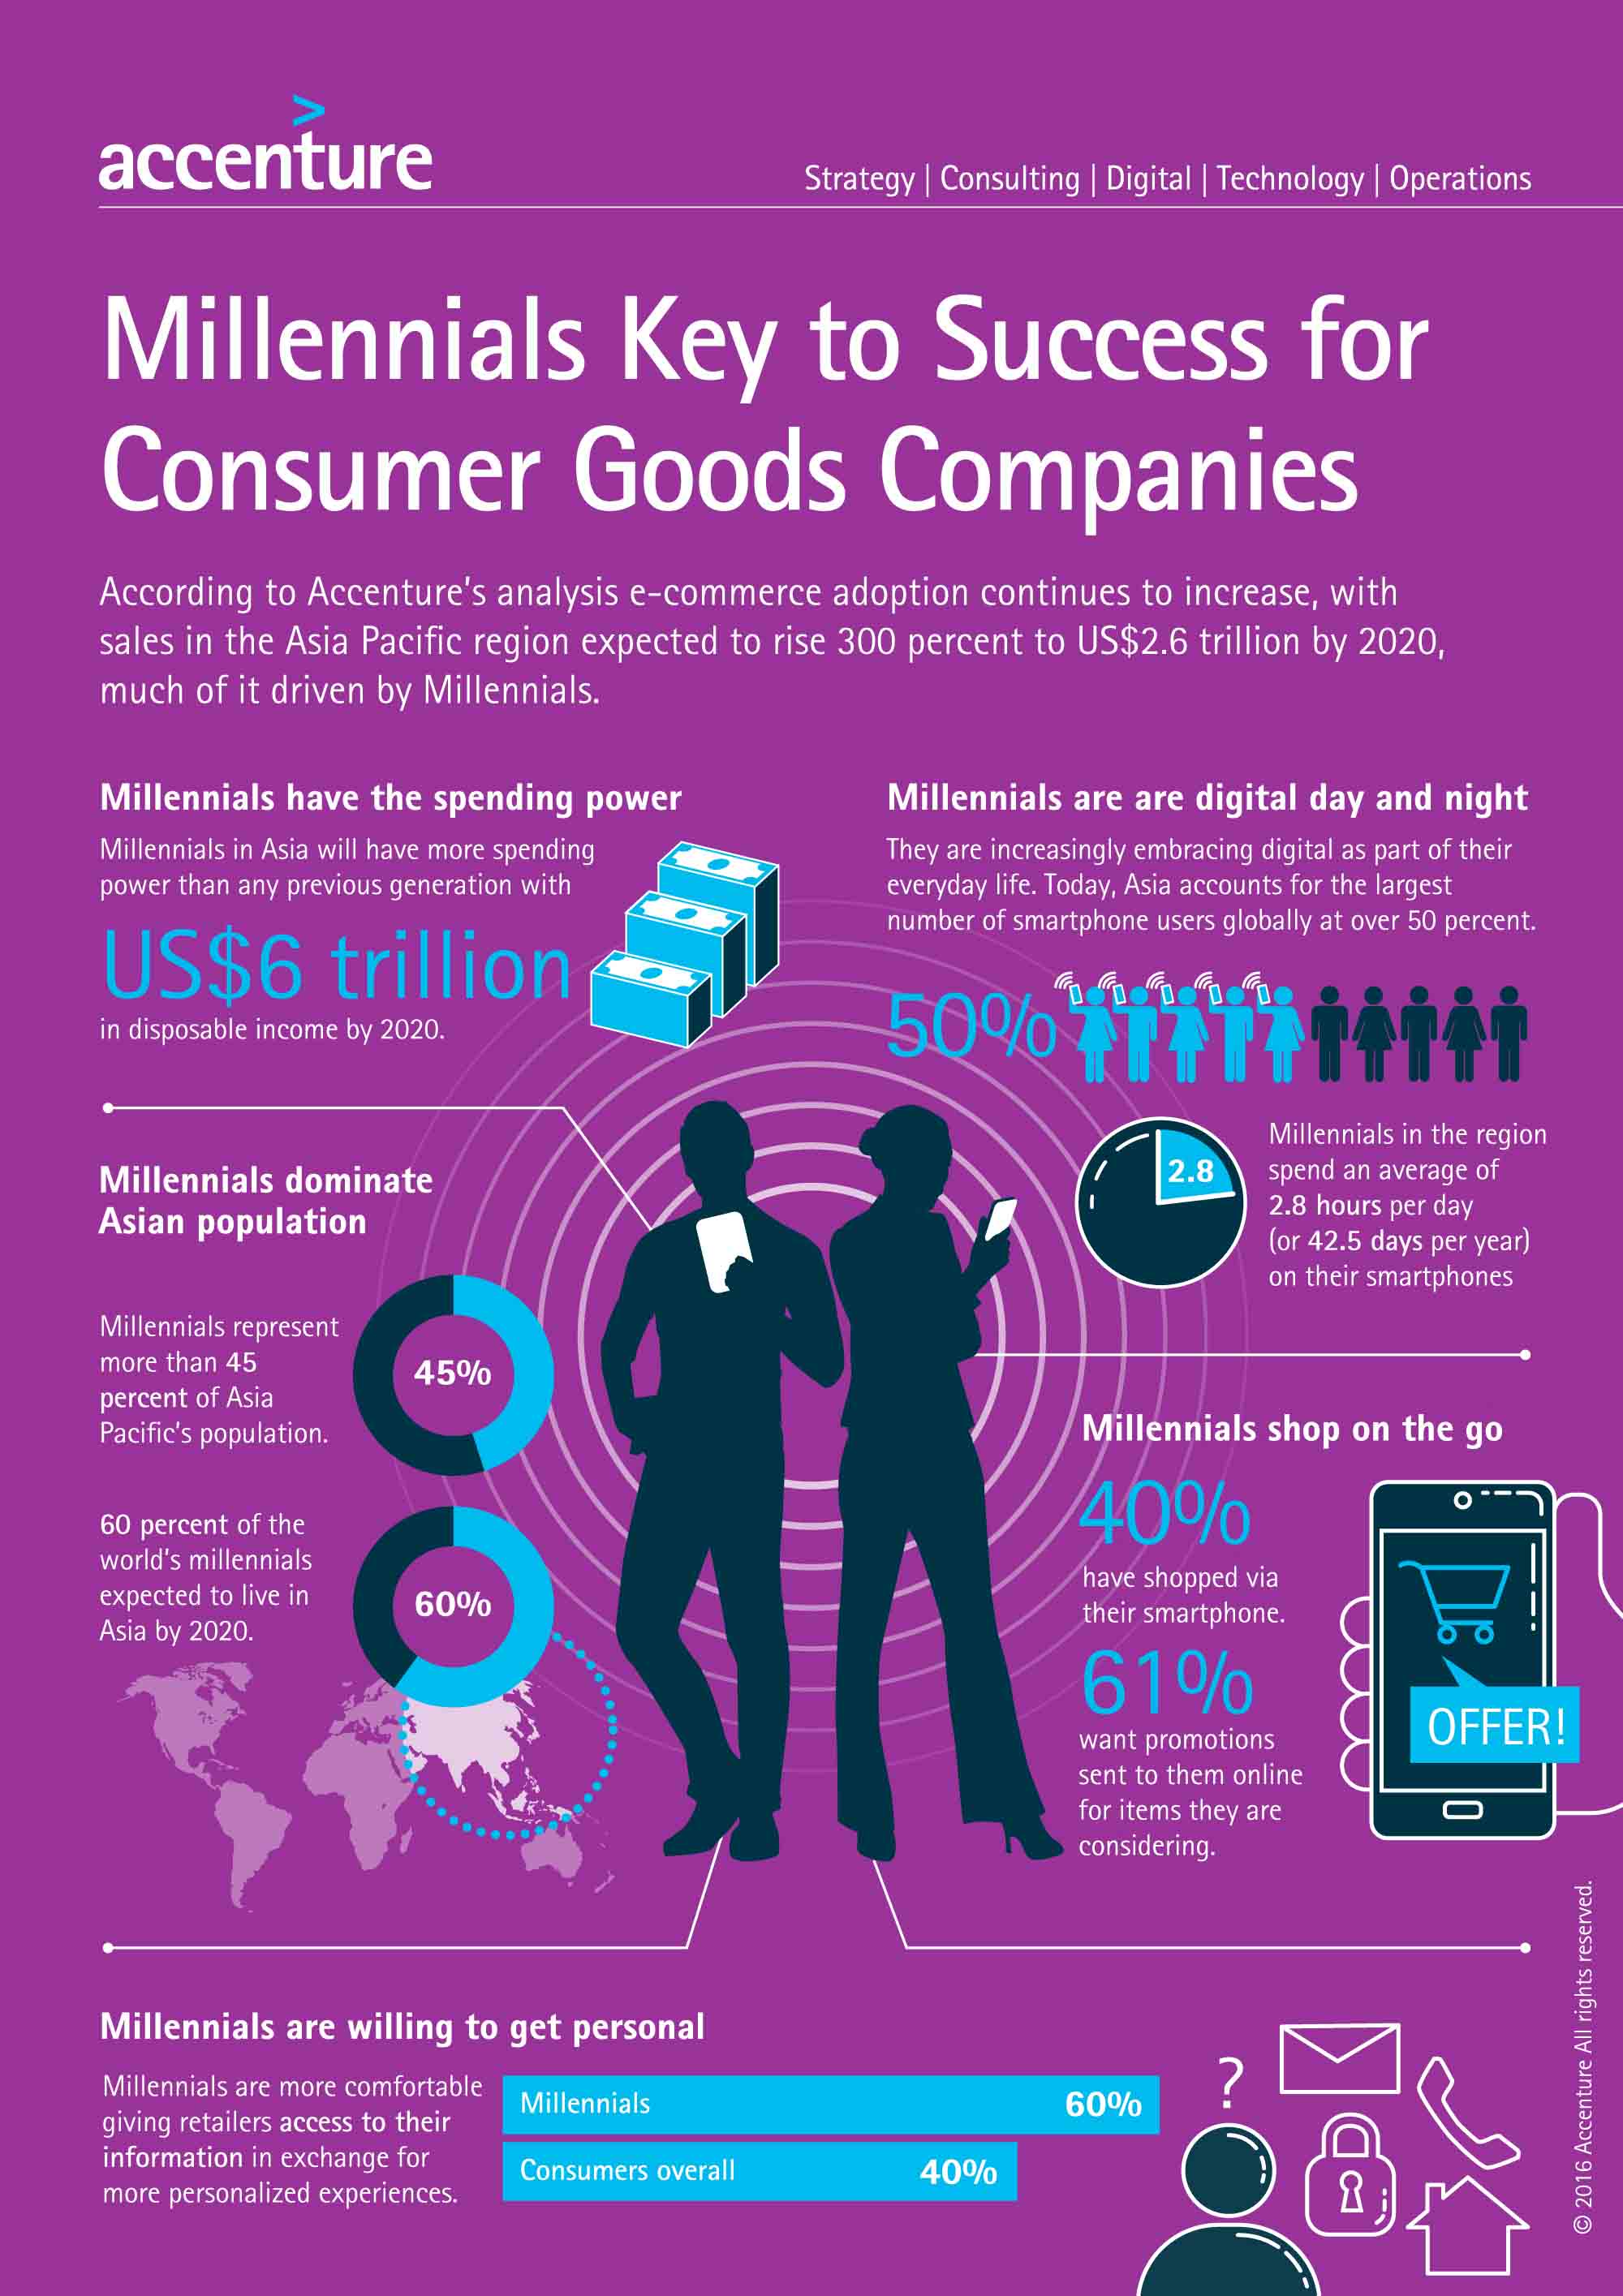 Accenture: Retailers and consumer packaged goods companies must improve their understanding of the millennial generation in Asia 